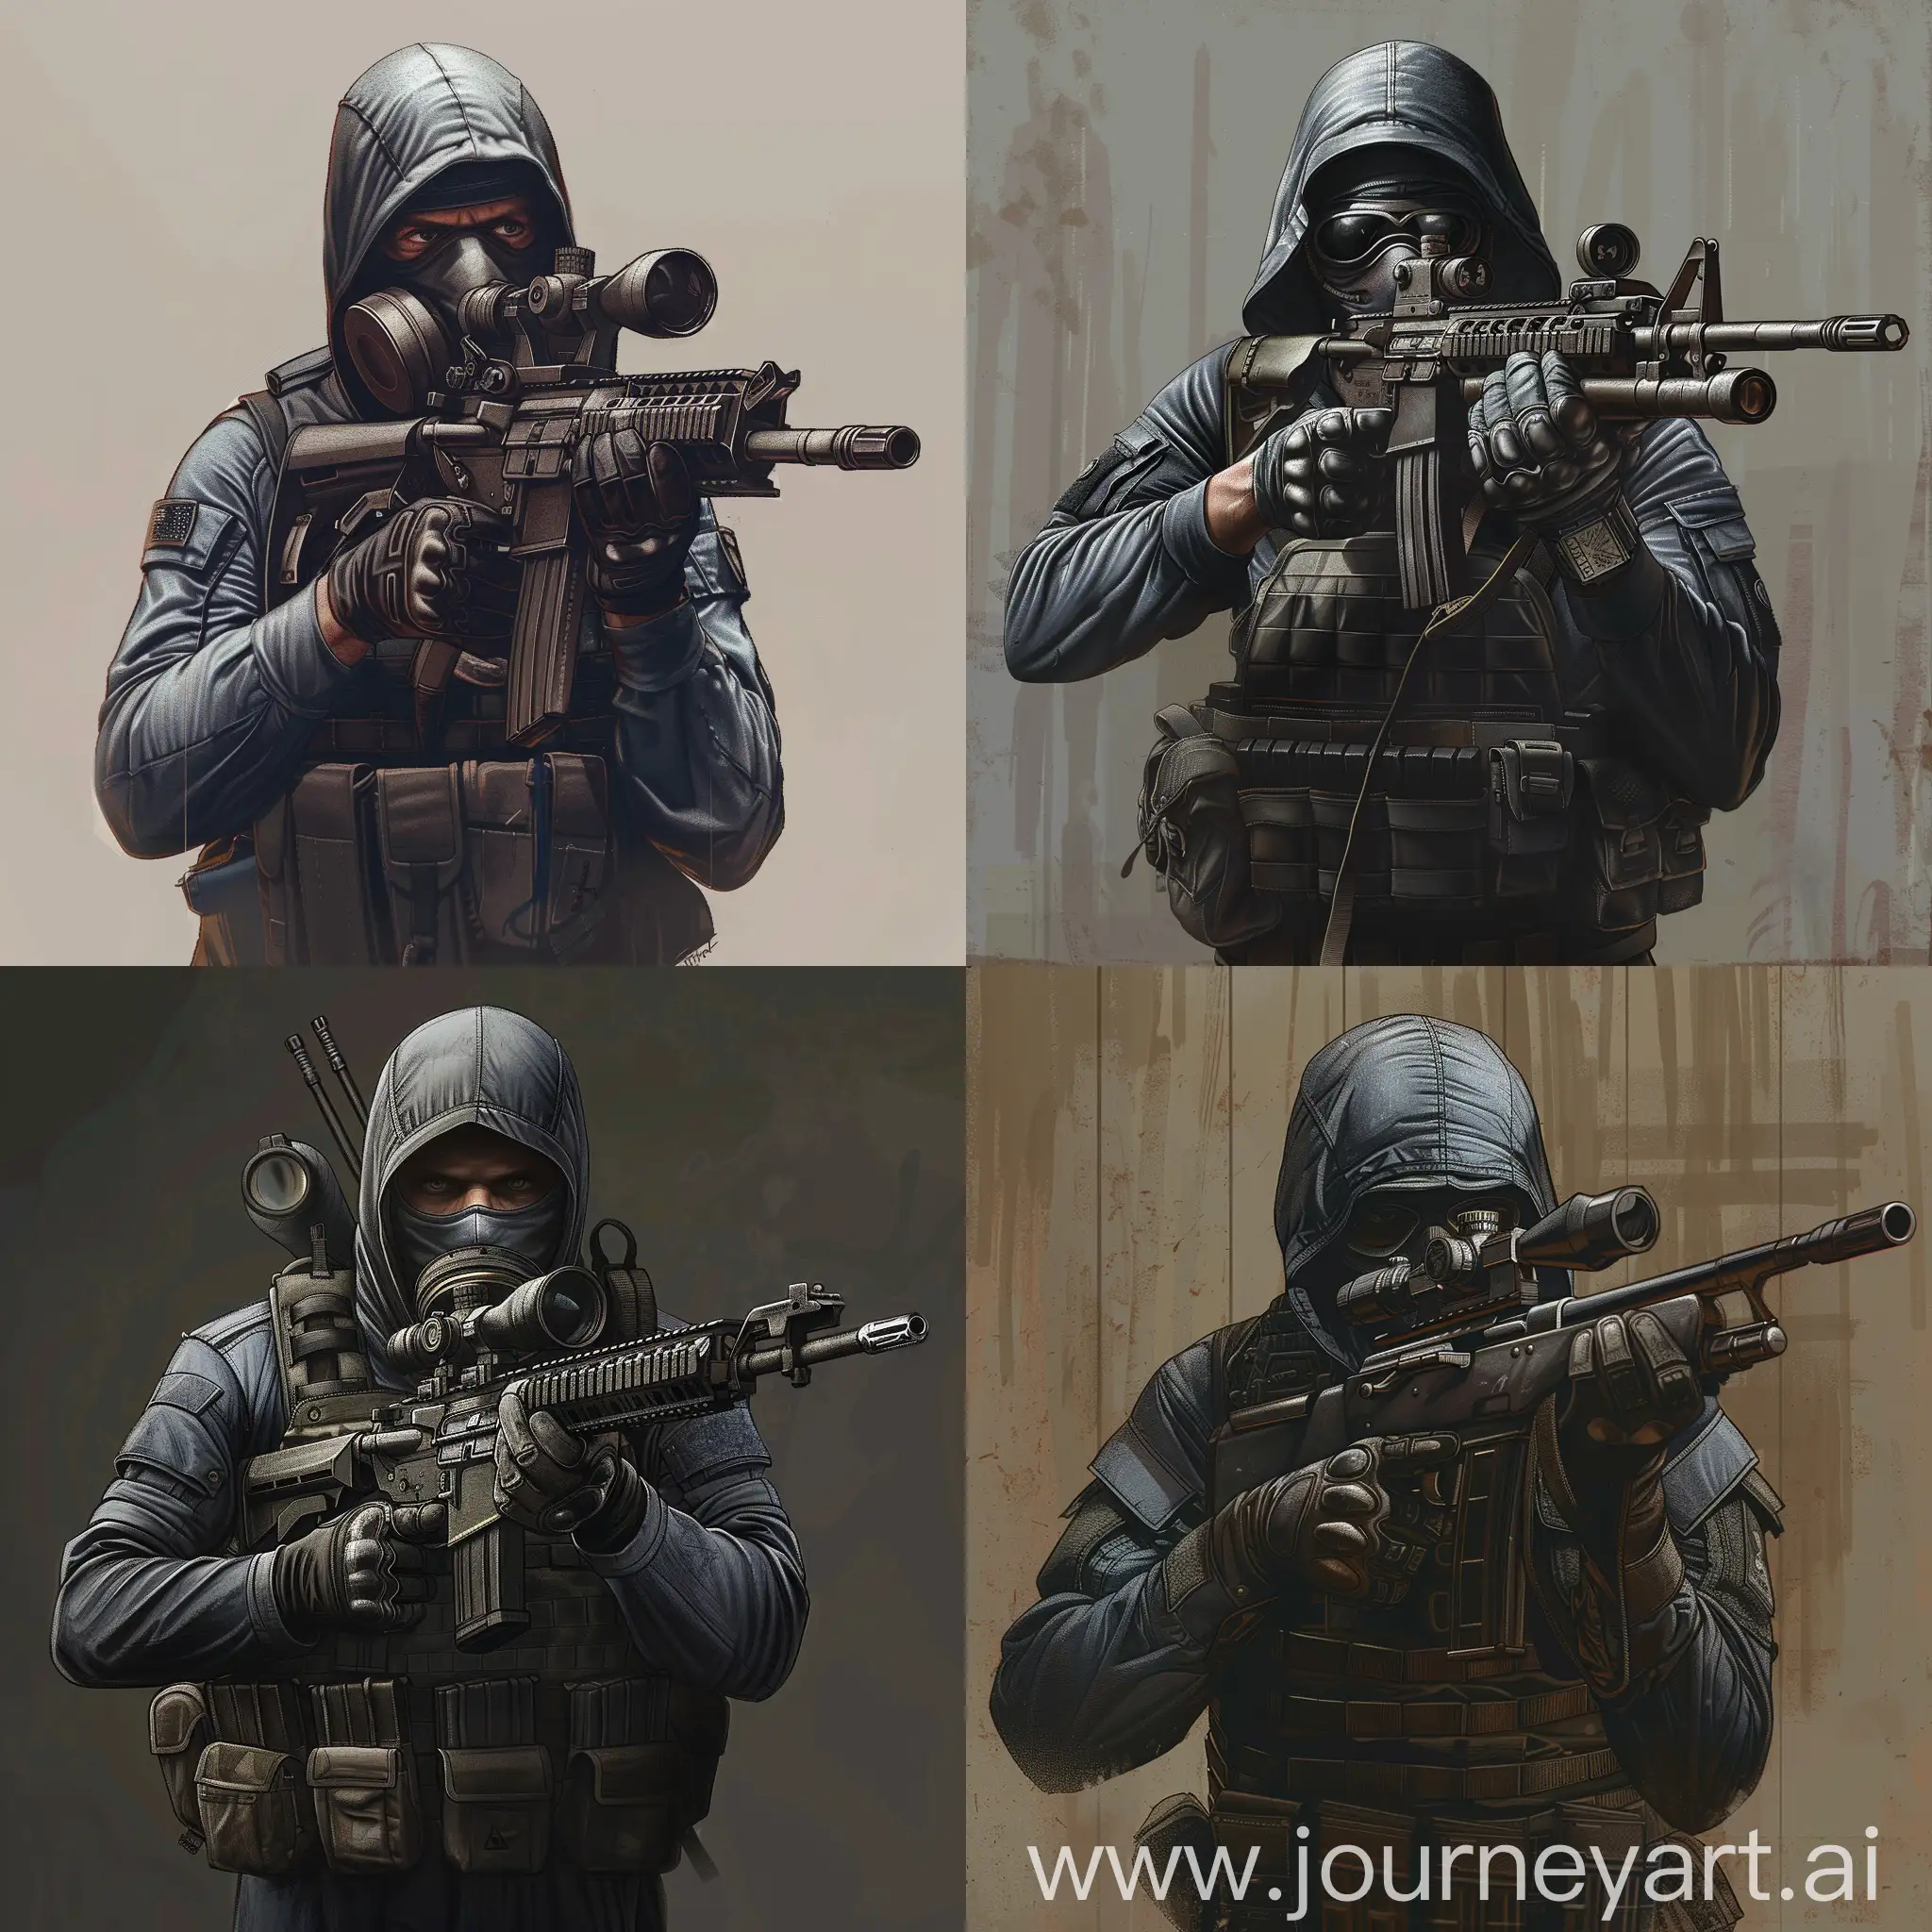 Concept art character, digital, American soldier of the Vietnam War in a bulletproof vest of that time, with a sniper rifle in his hands, a balaclava on his face, a gasmask on top of the balaclava of that time.